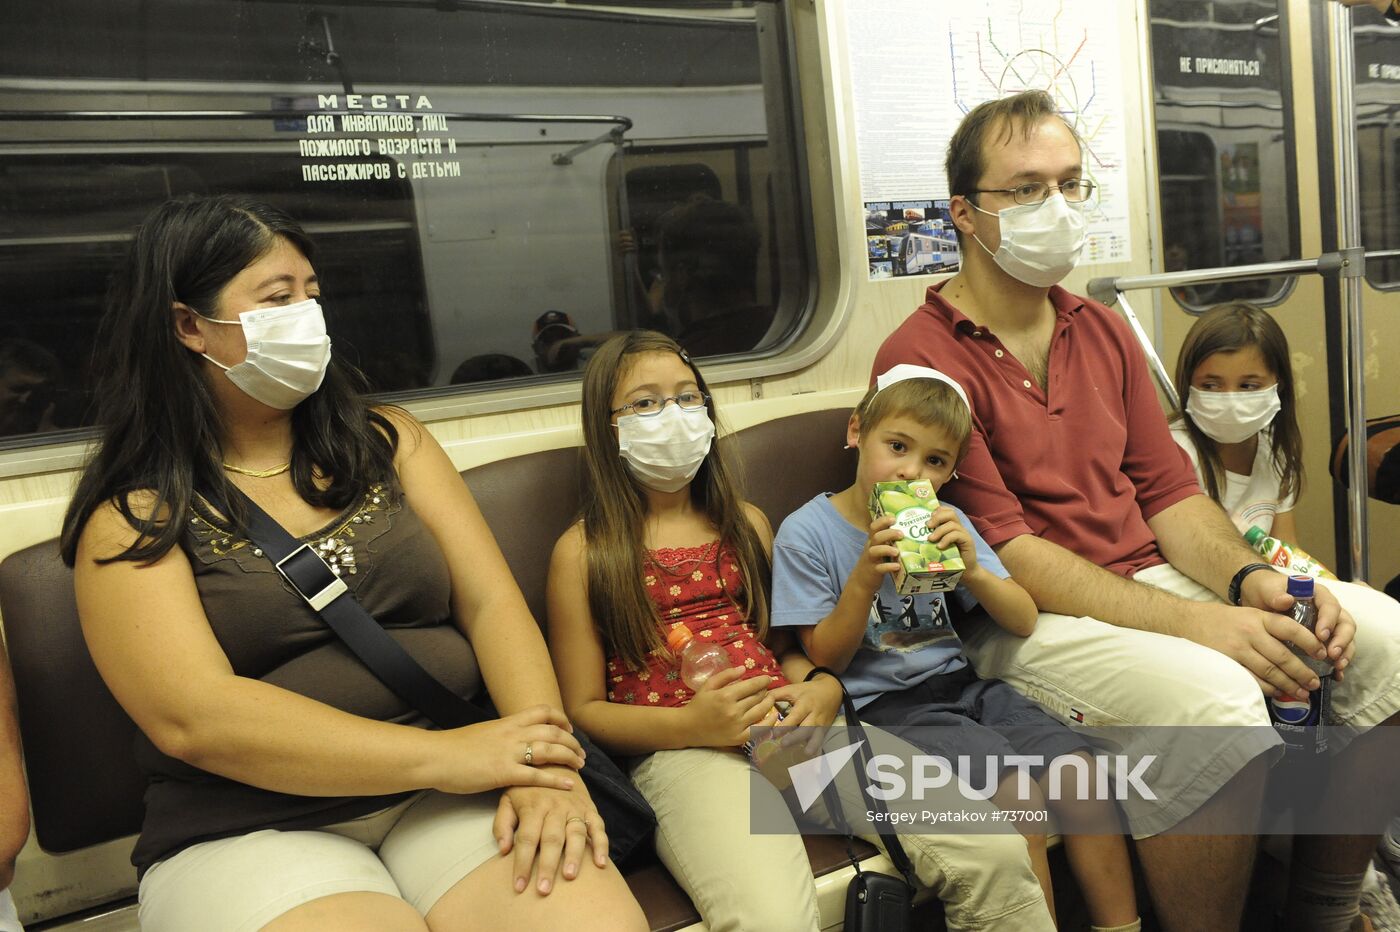 Passengers in gas masks